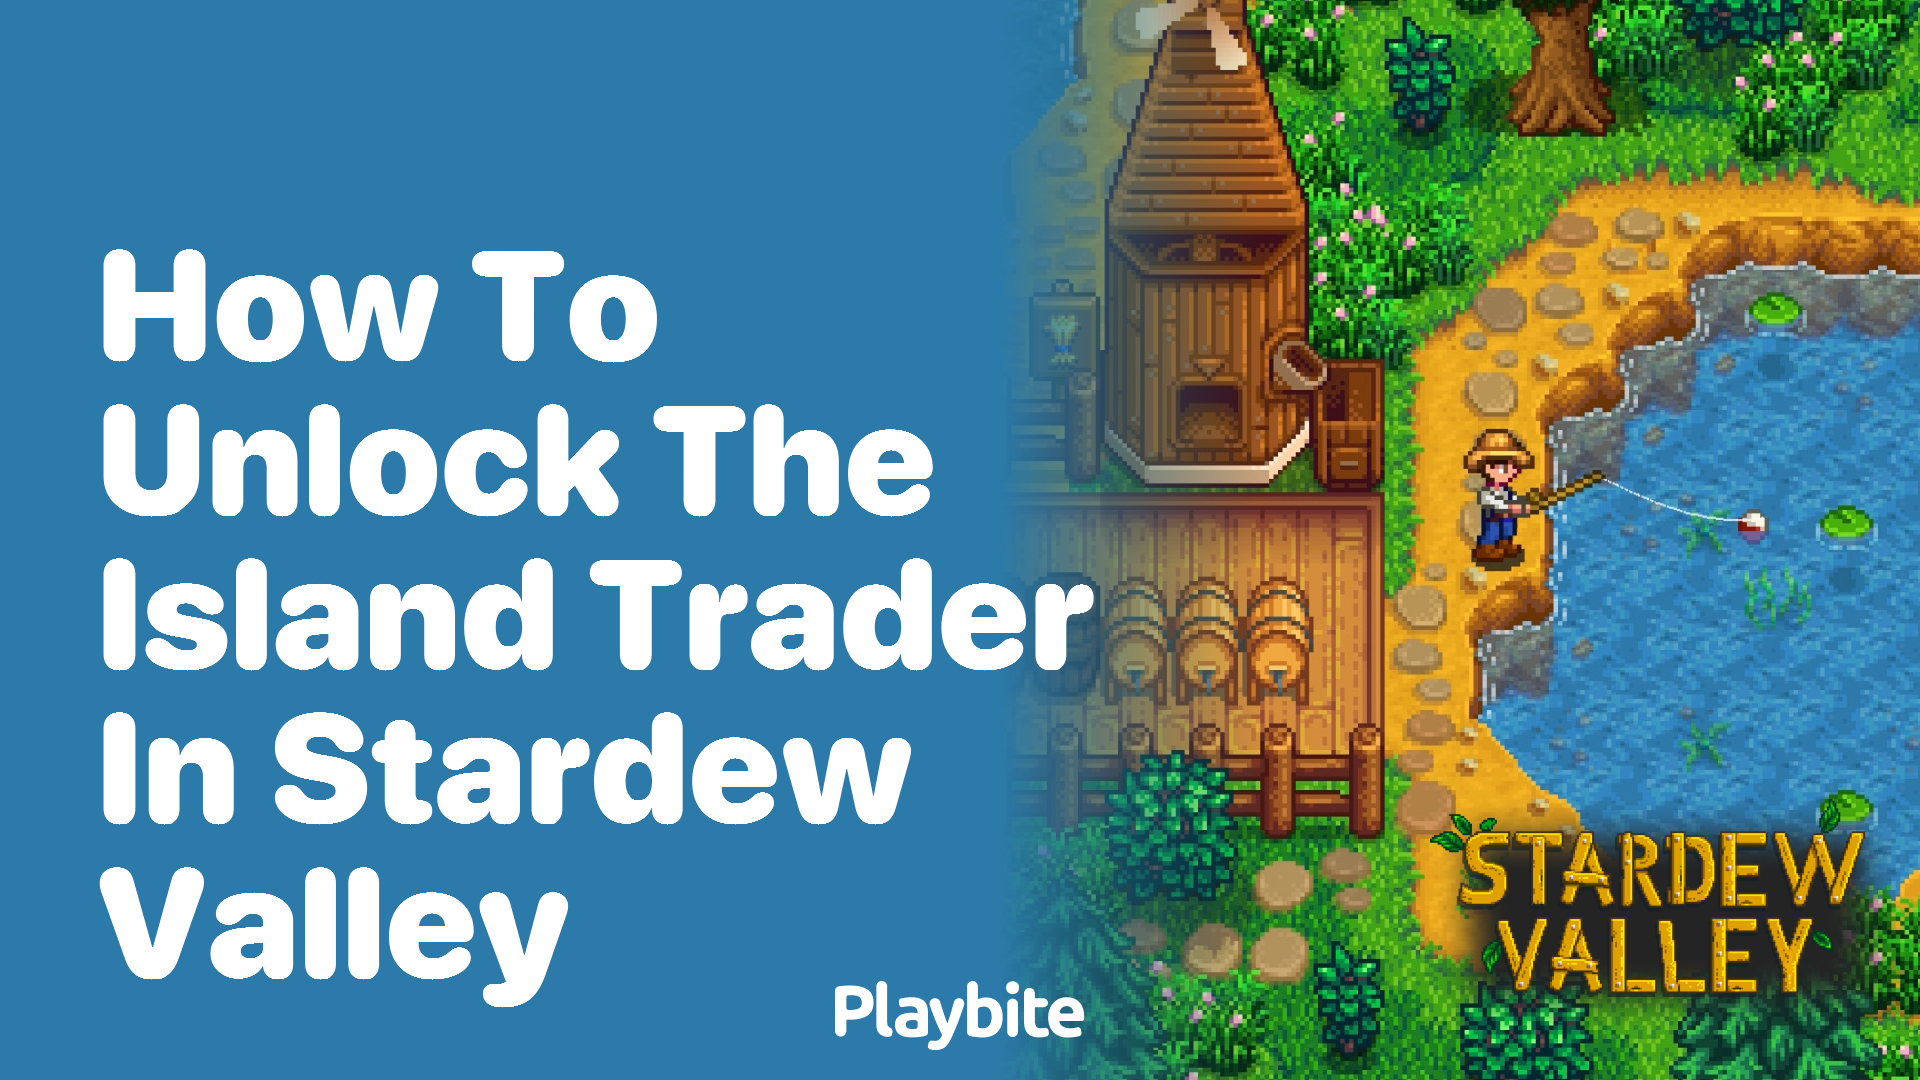 How to Unlock the Island Trader in Stardew Valley